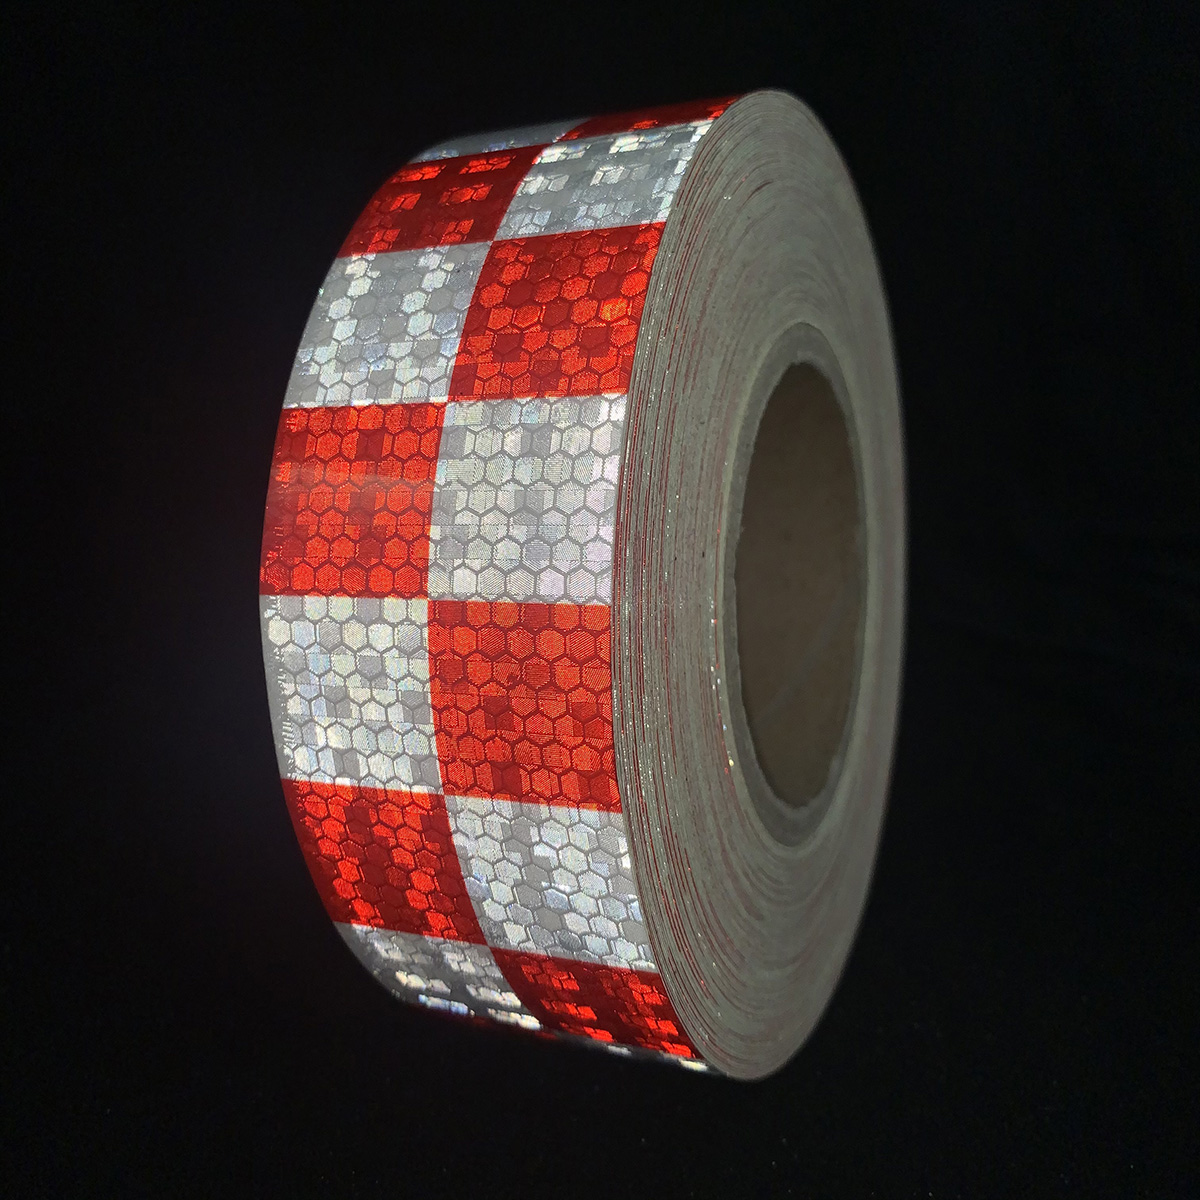 PVC Red White Reflective Tape For Road Safety Warning Sign